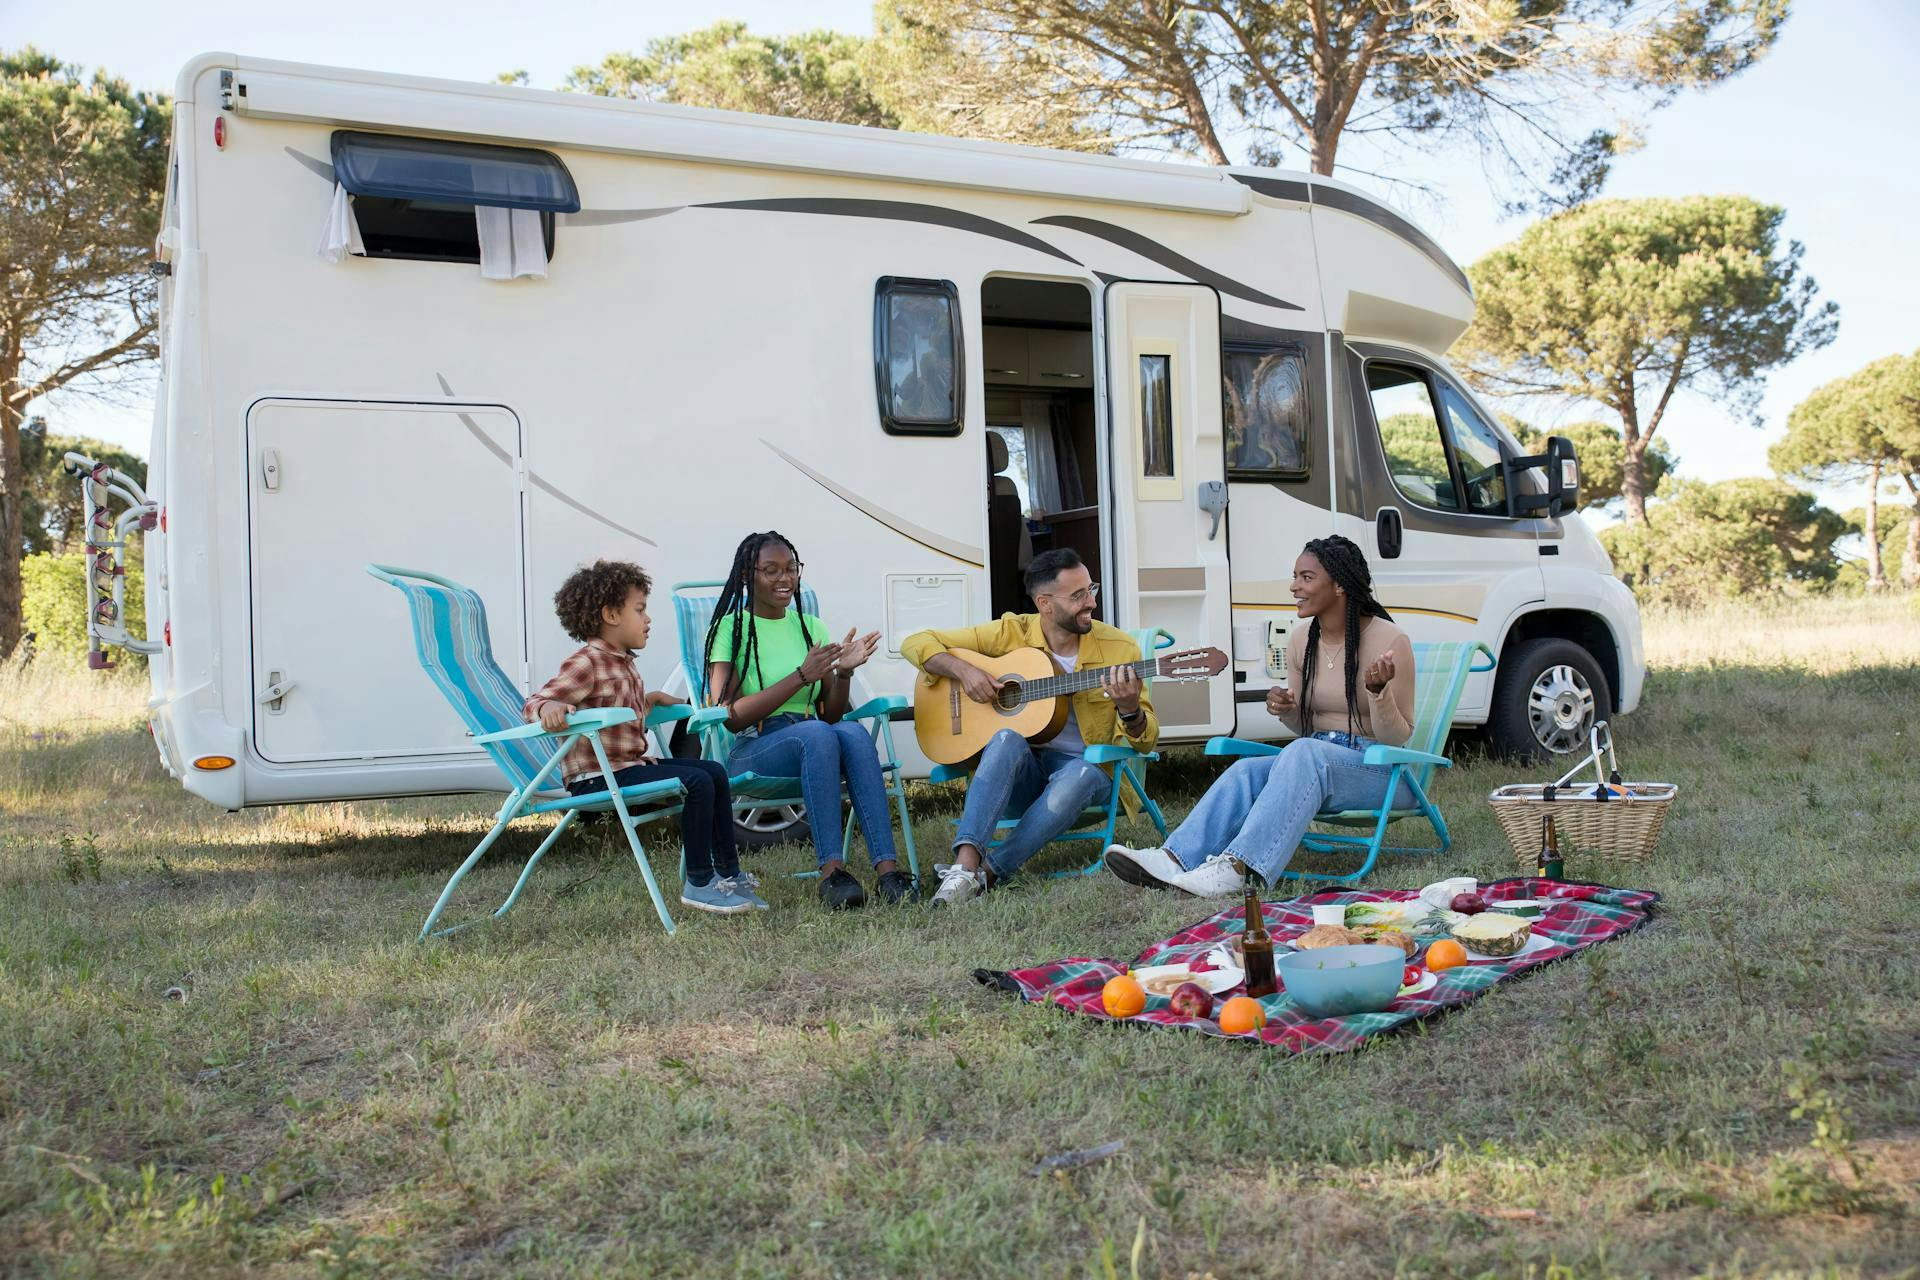 8 Tips for Creating a Cozy Outdoorsy Camper Rental For Airbnb